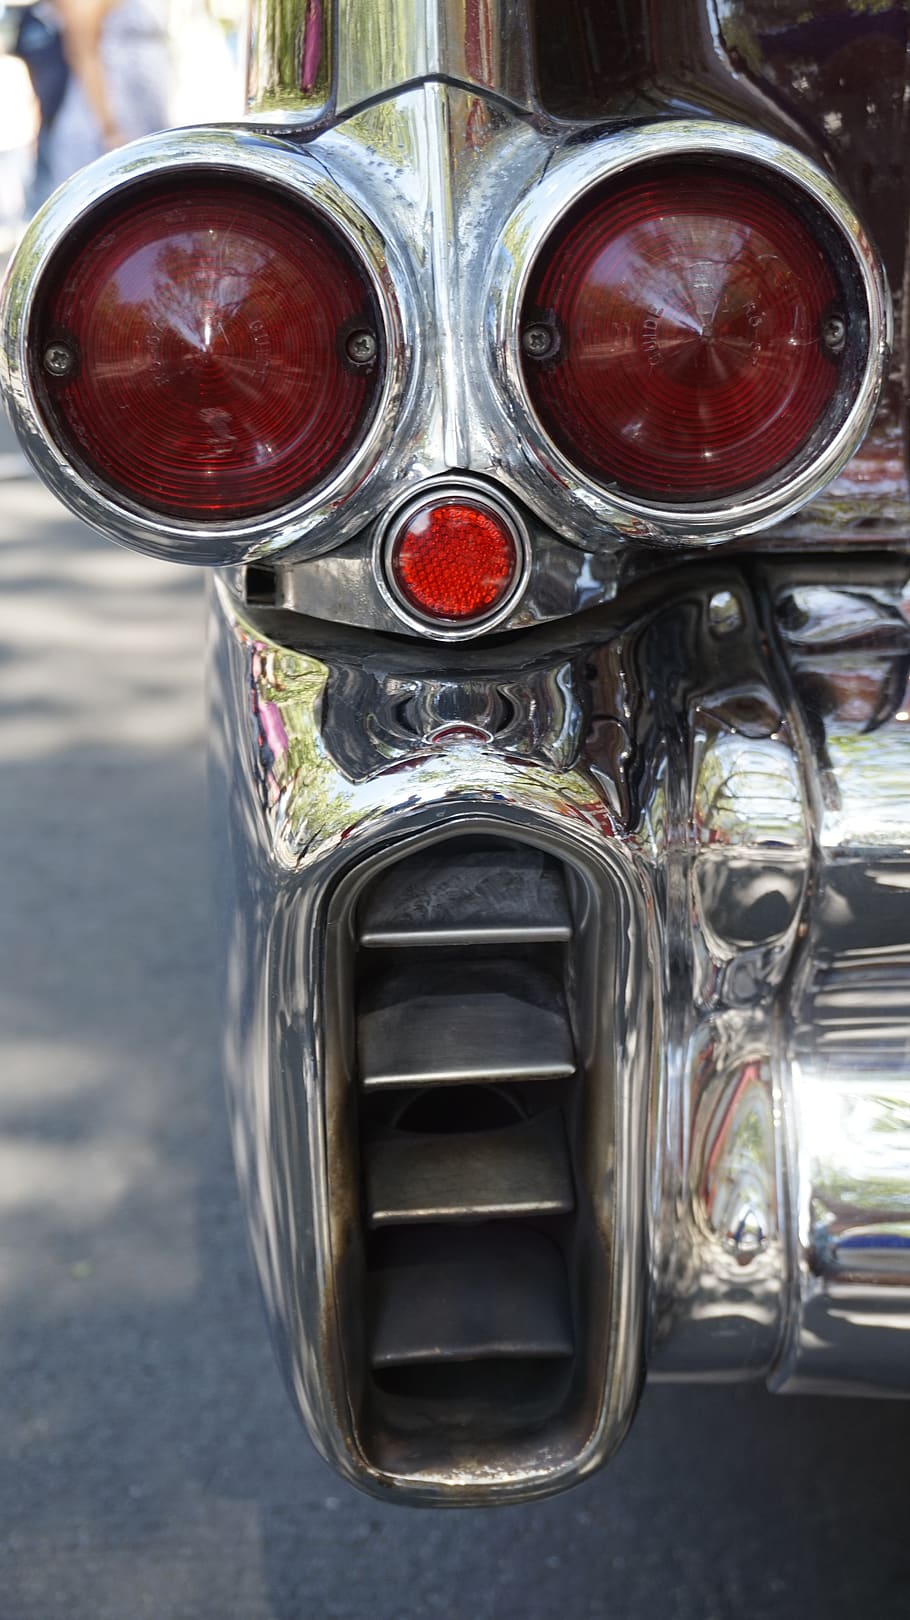 chrome, taillights, exhaust, stop lamp, brake light, oldtimer, classic, scream face, close-up, red